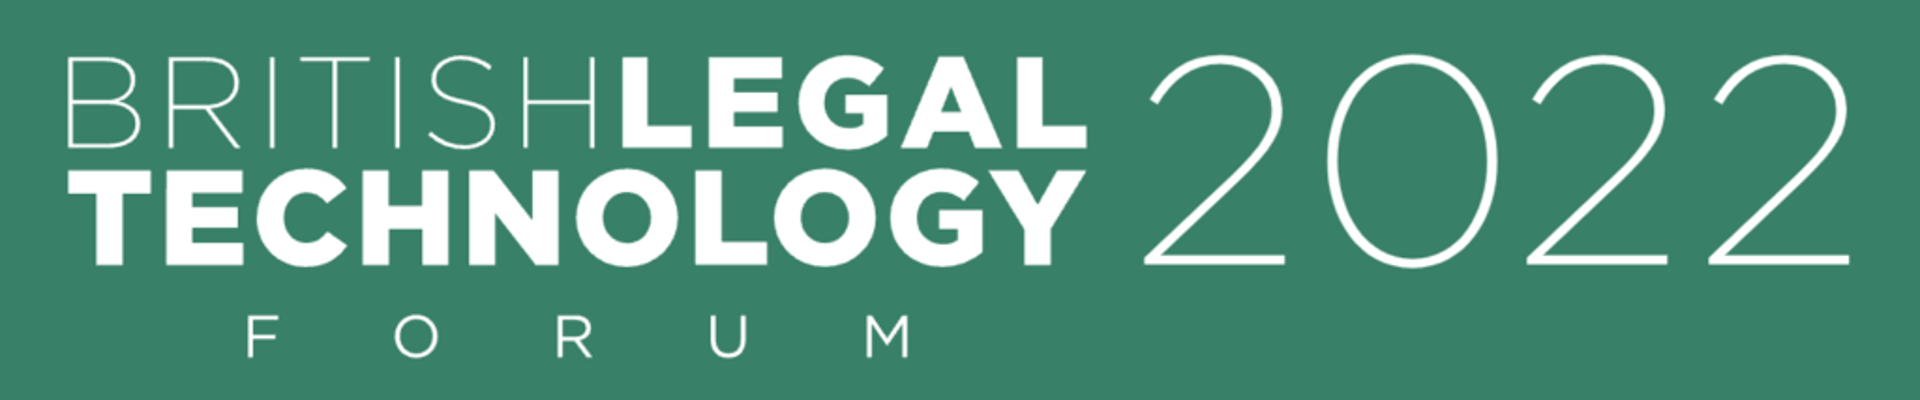 What to expect at the British Legal Technology Forum